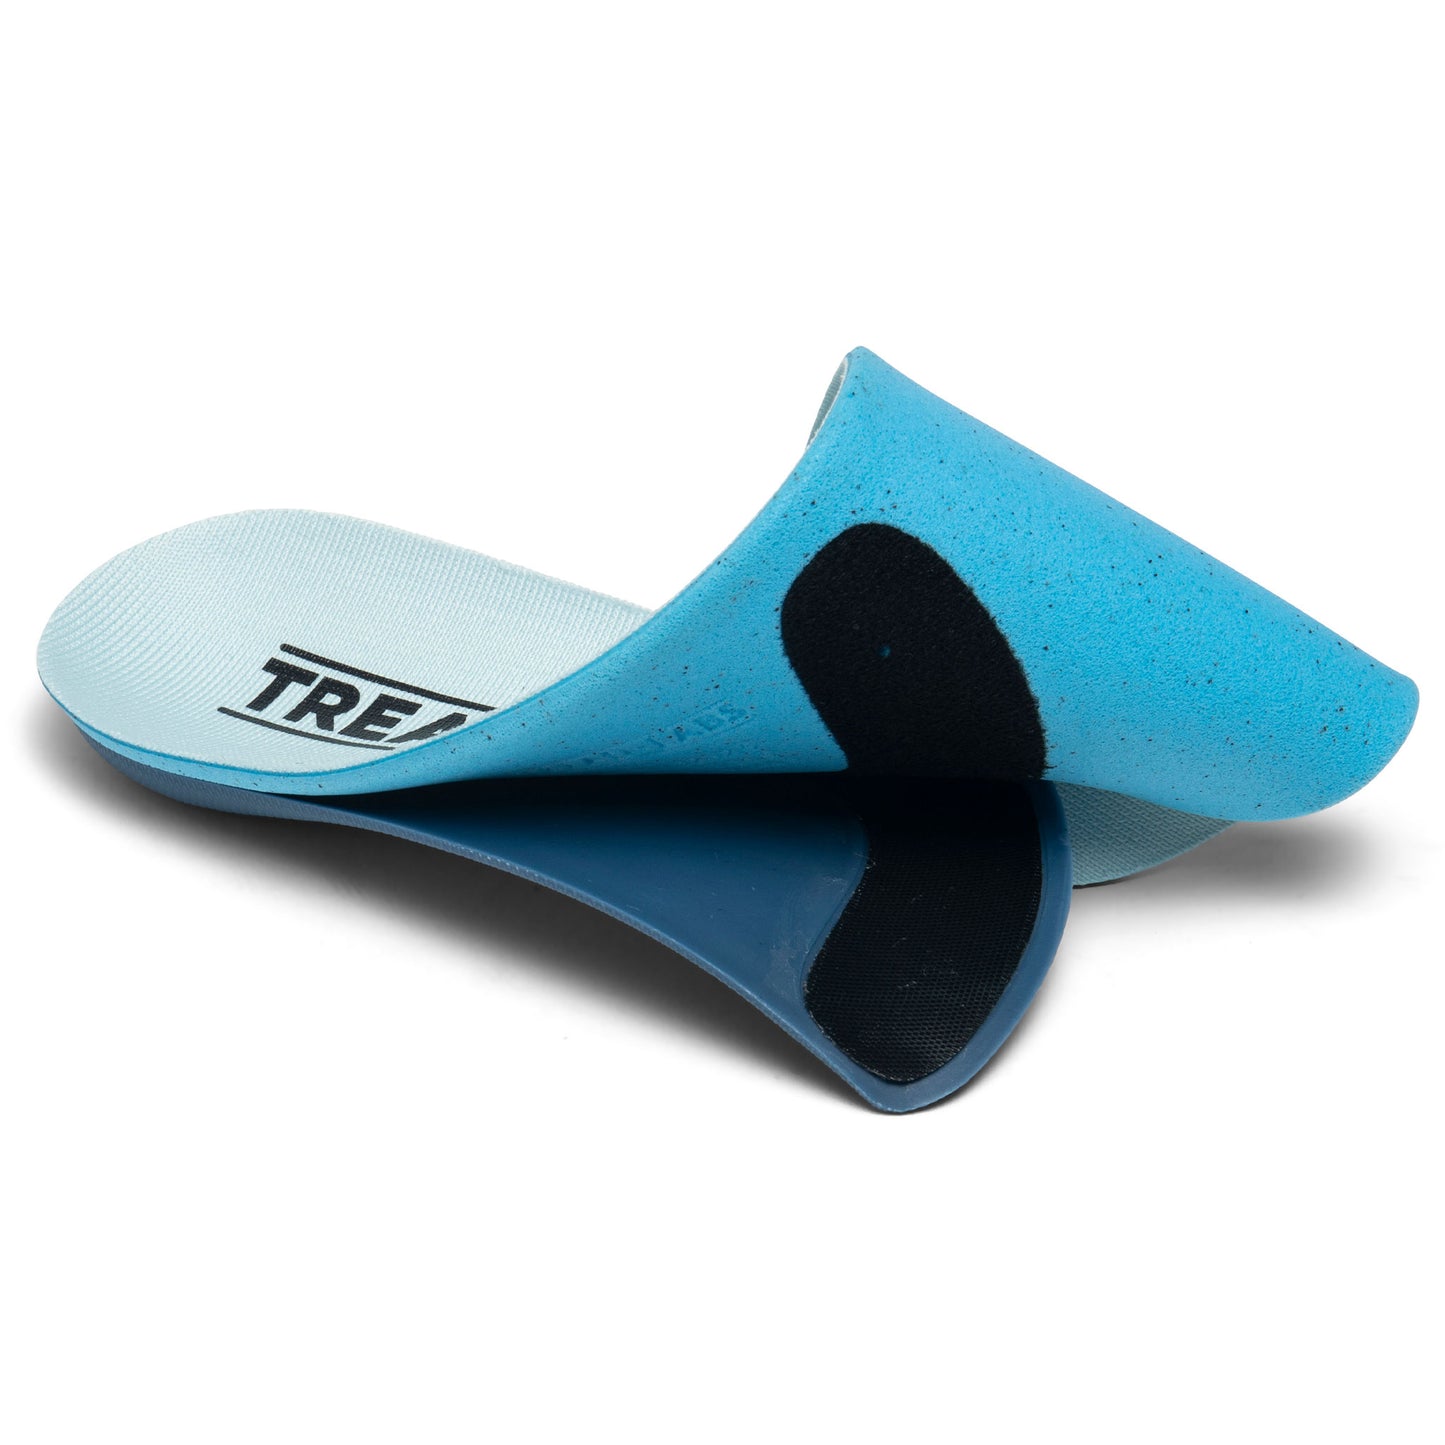 Pace Insole Features Tread Labs Two-Part Insole System